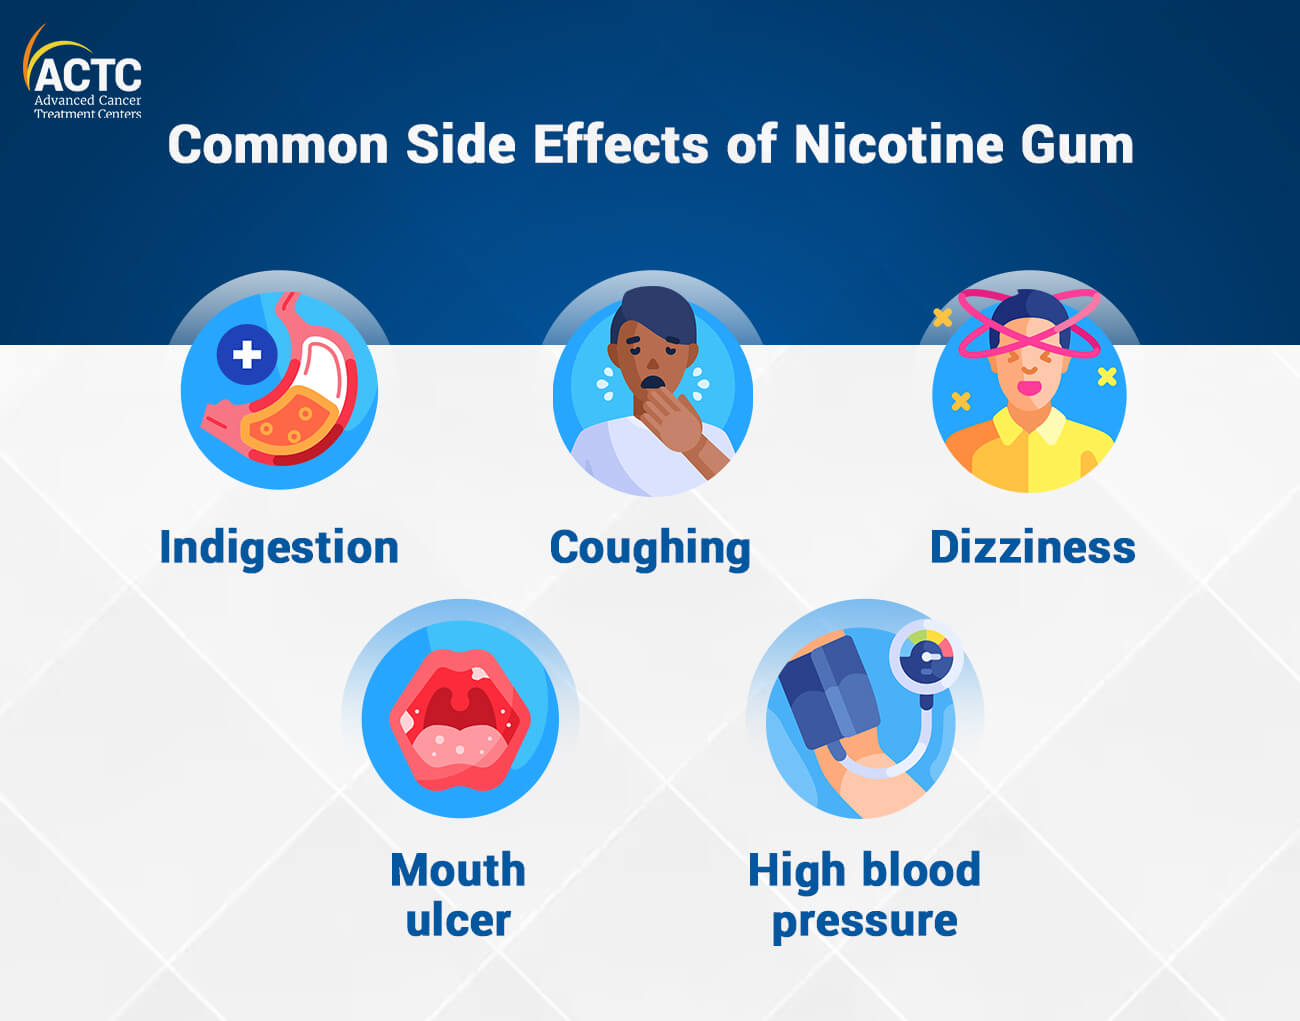 Can Nicotine Gum Cause Cancer